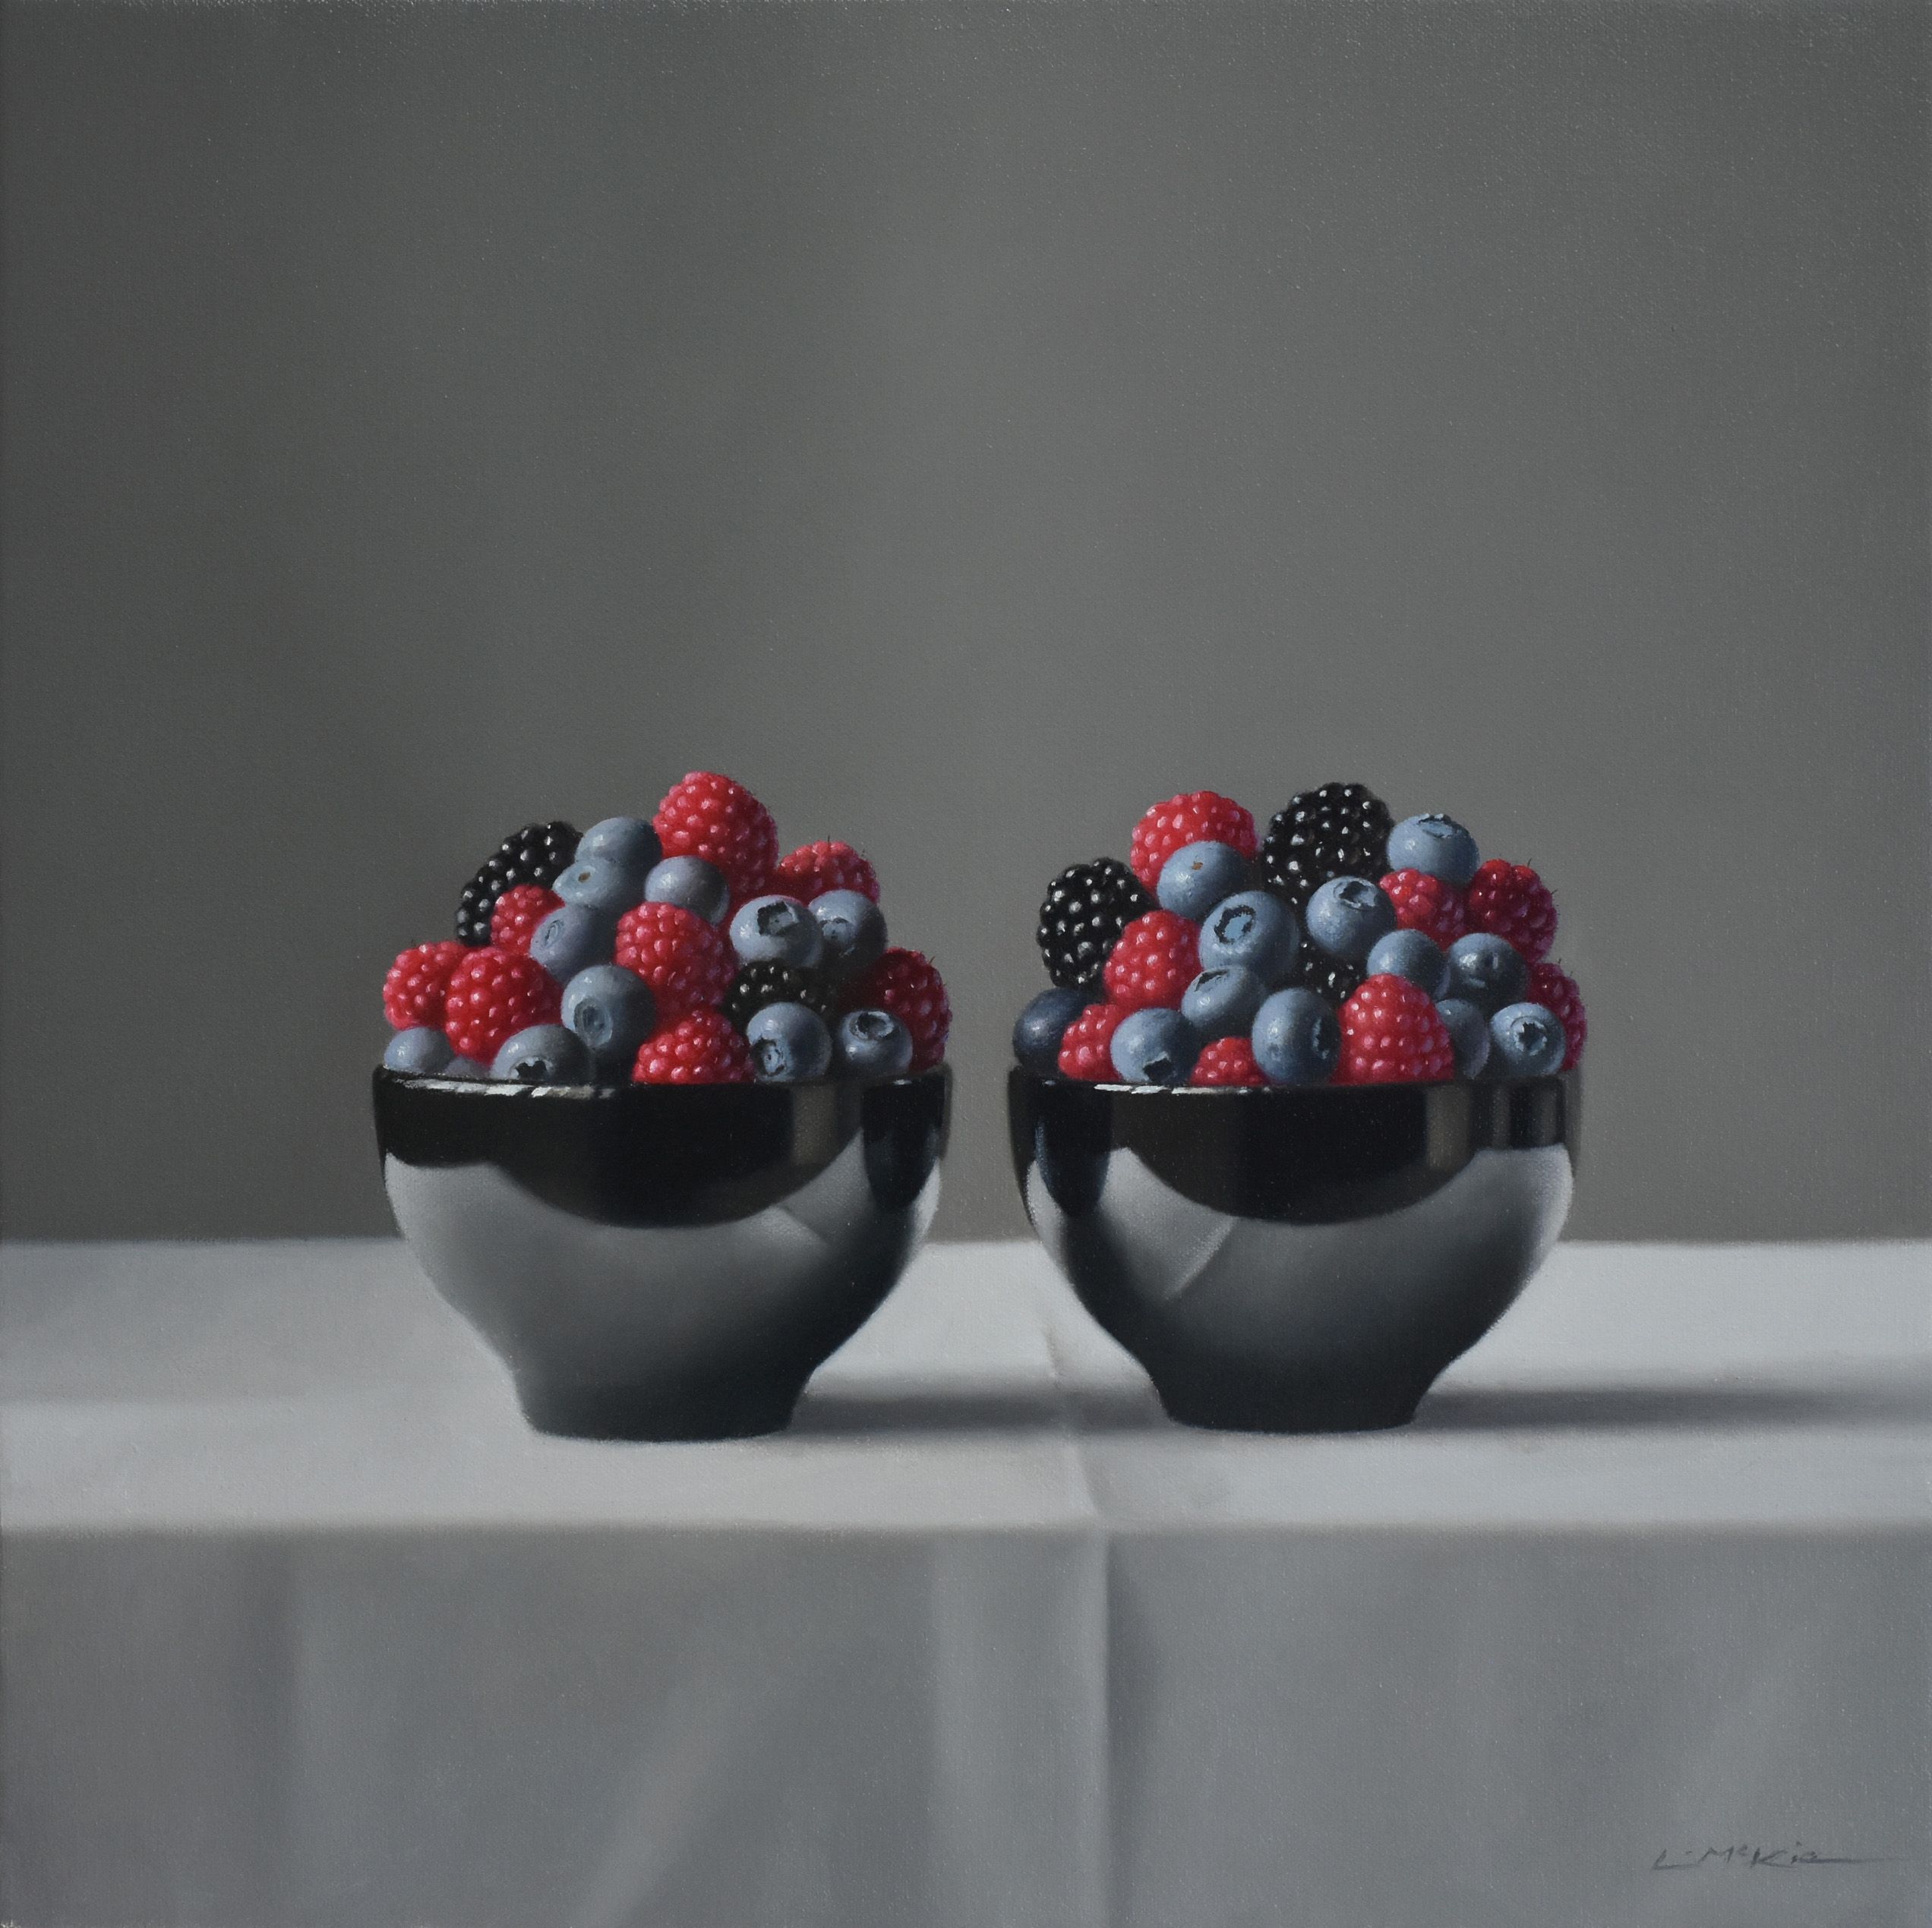 Black Bowls with Berries